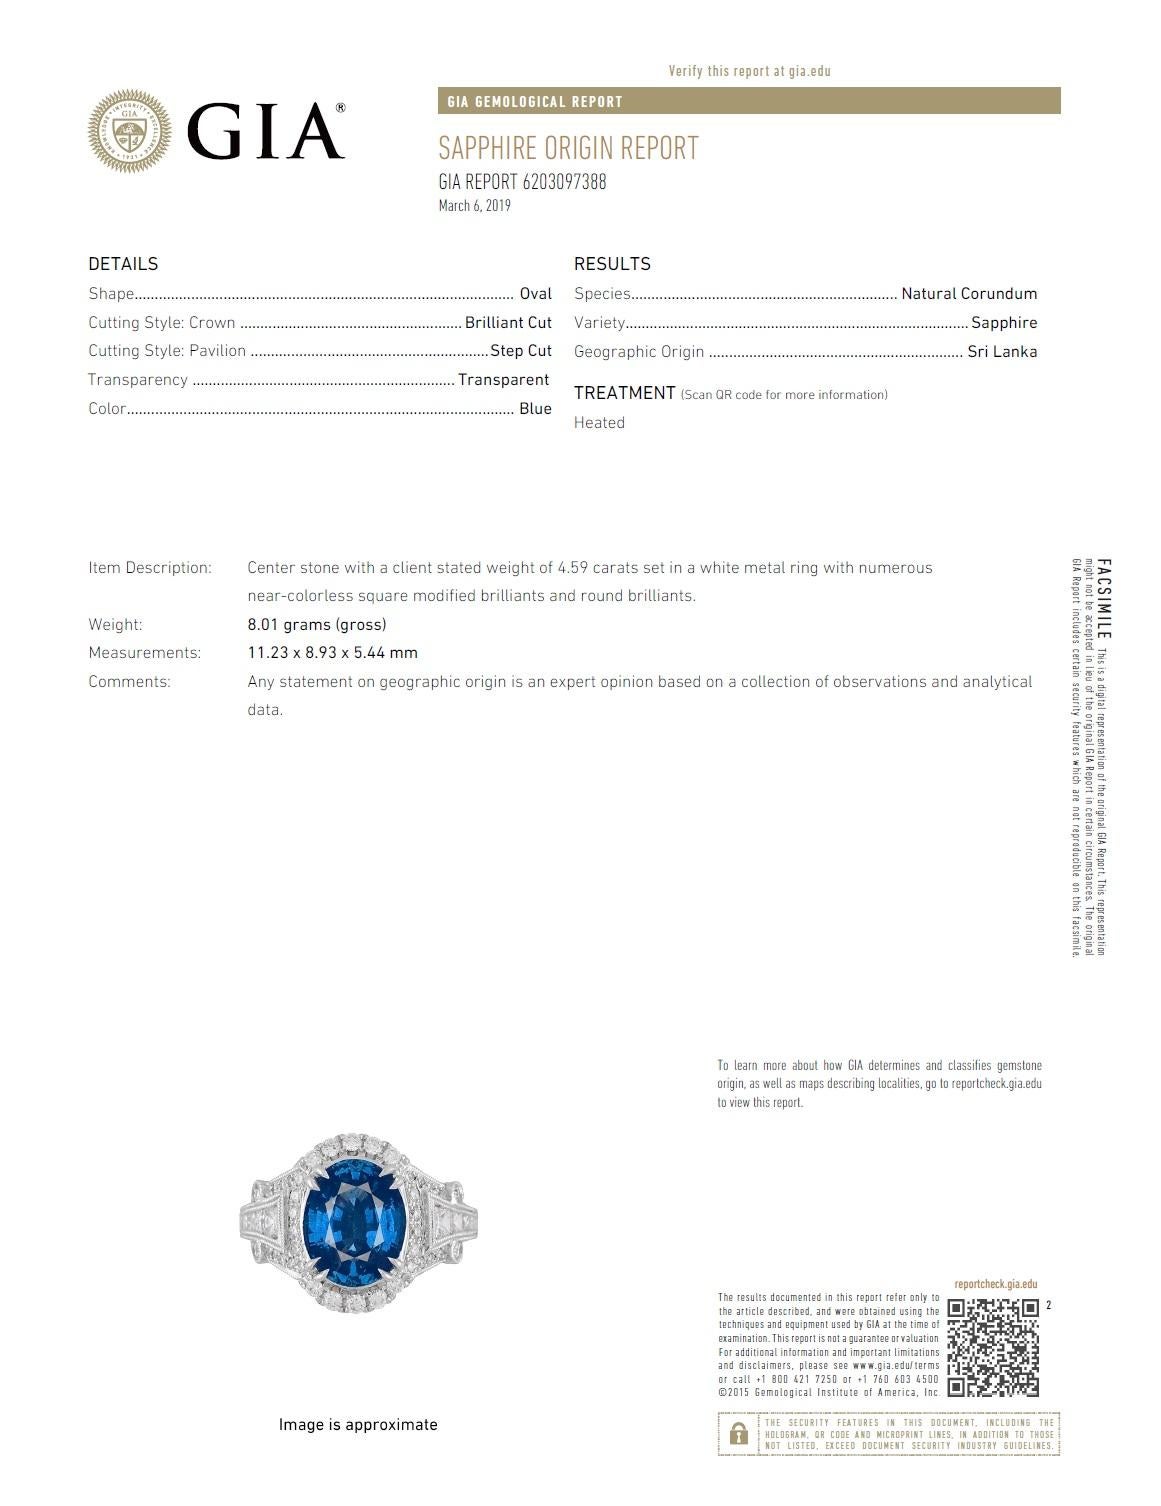 Indulge in opulent elegance with this exquisite ring, boasting a mesmerizing GIA Certified 4.59 carat oval cut fine Ceylon sapphire at its core. Crafted to captivate, this centerpiece is embraced by 1.01 carats of dazzling white diamonds, forming a